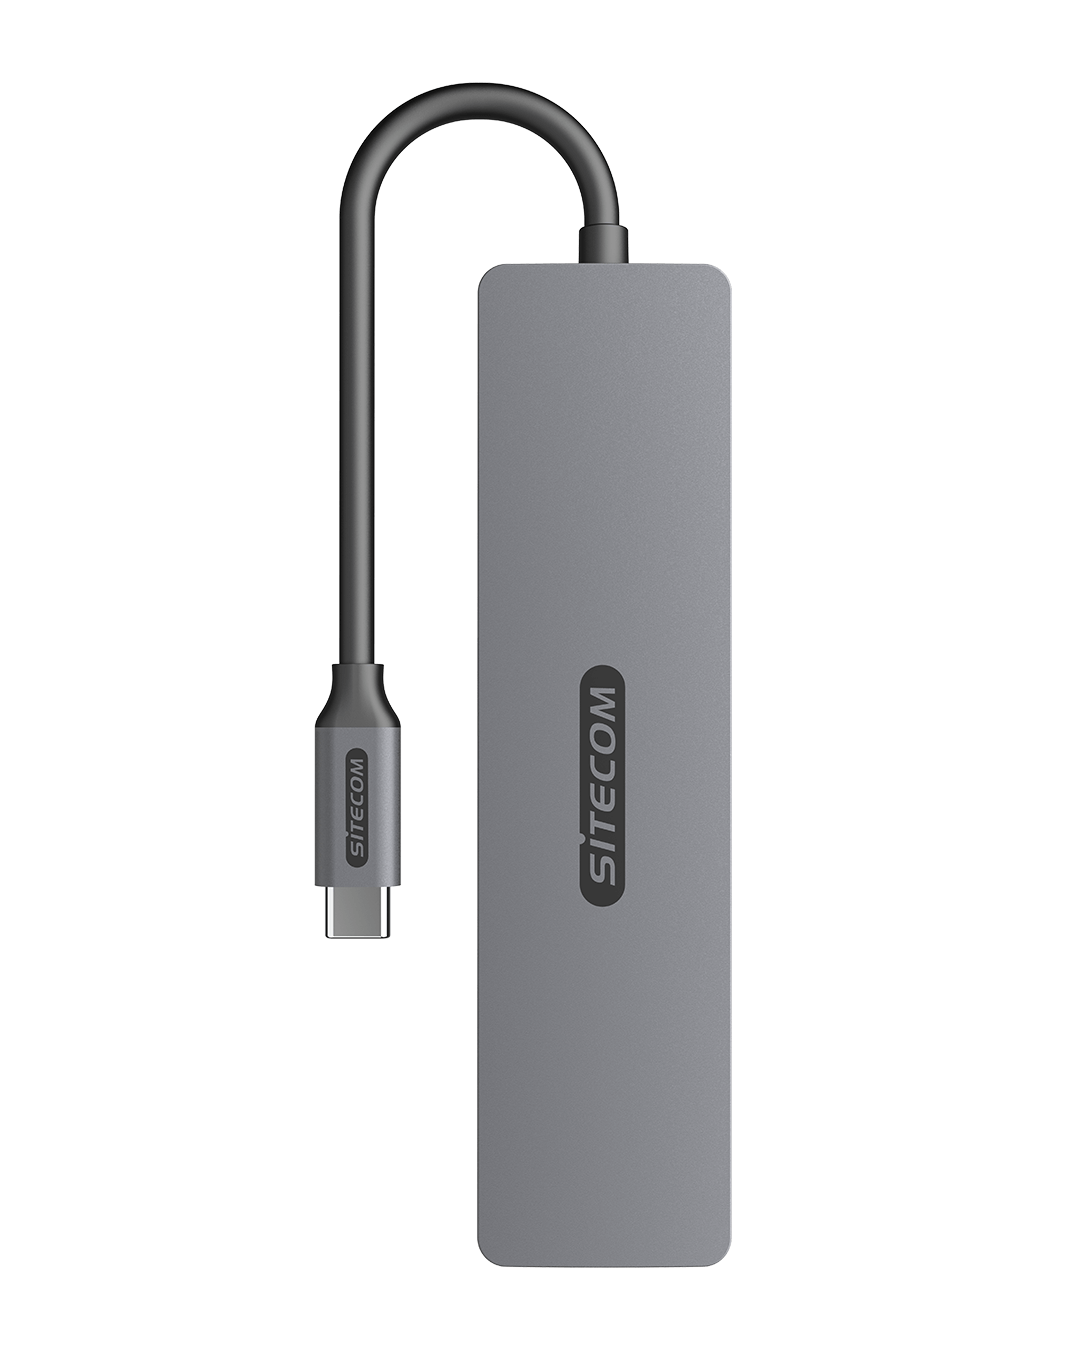 Sitecom - 7 in 1 USB-C Power Delivery Multiport Adapter - CN-5505